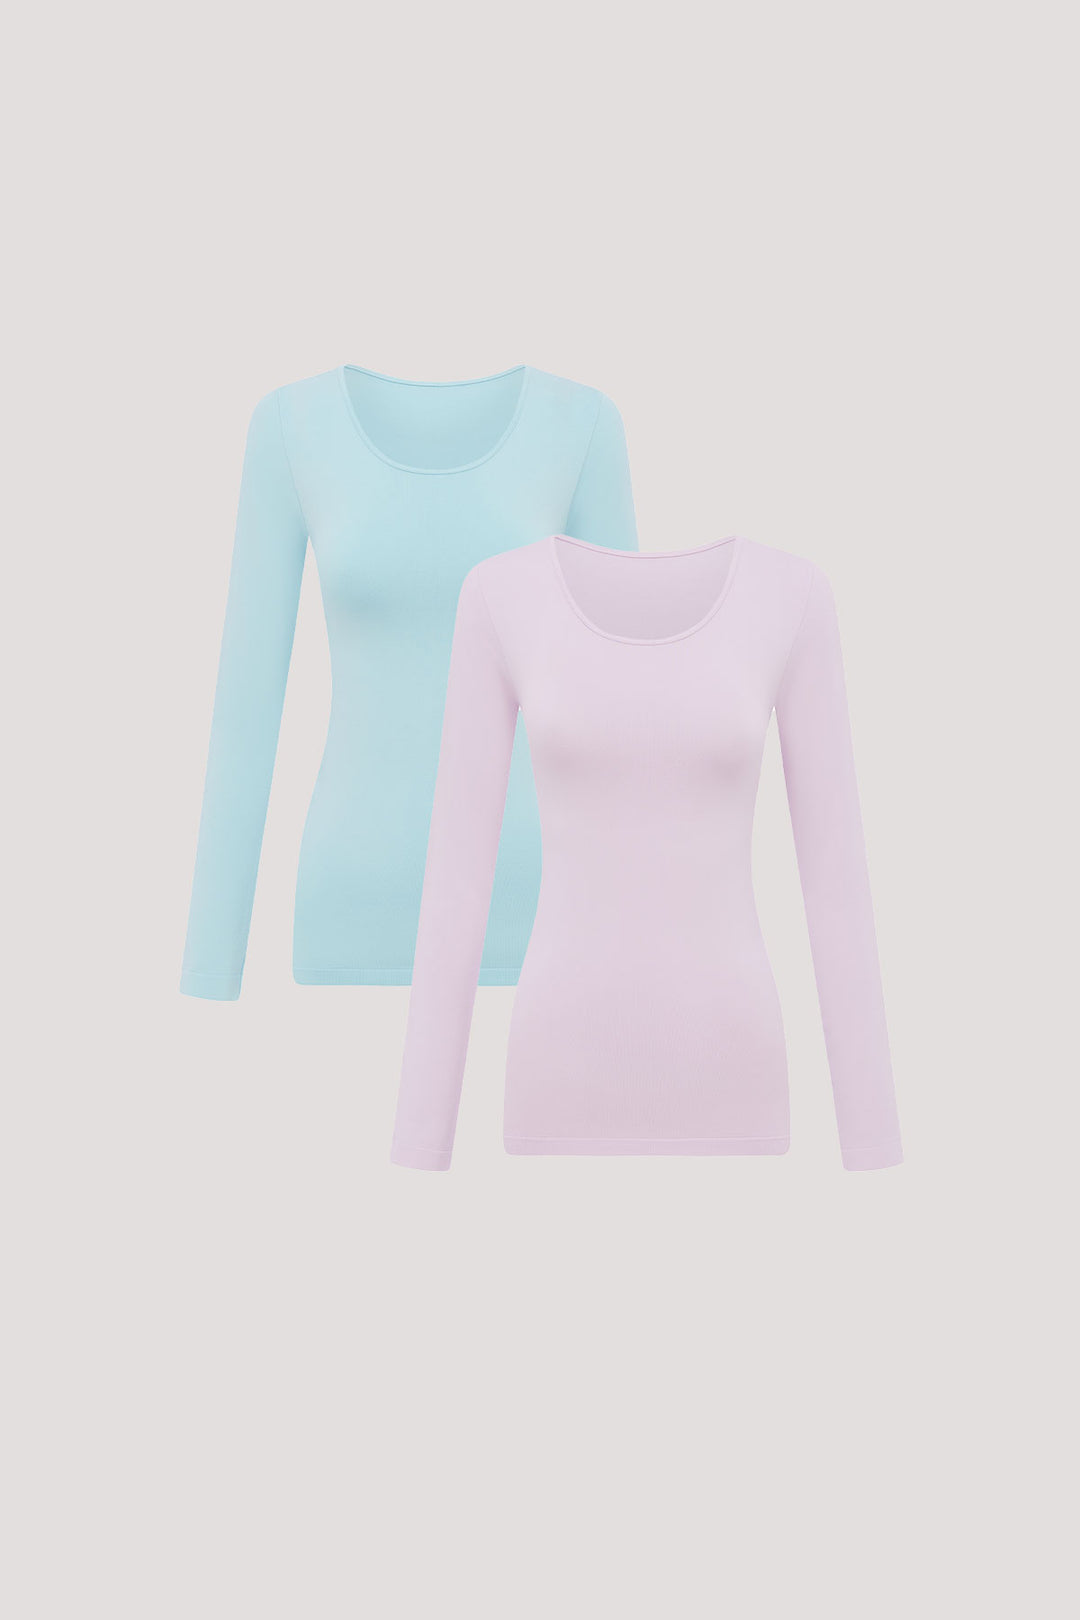 Womens breathable Modal Tencel Long Sleeve Top 2 pack | Bella Bodies Australia | Marine and Soft Lilac